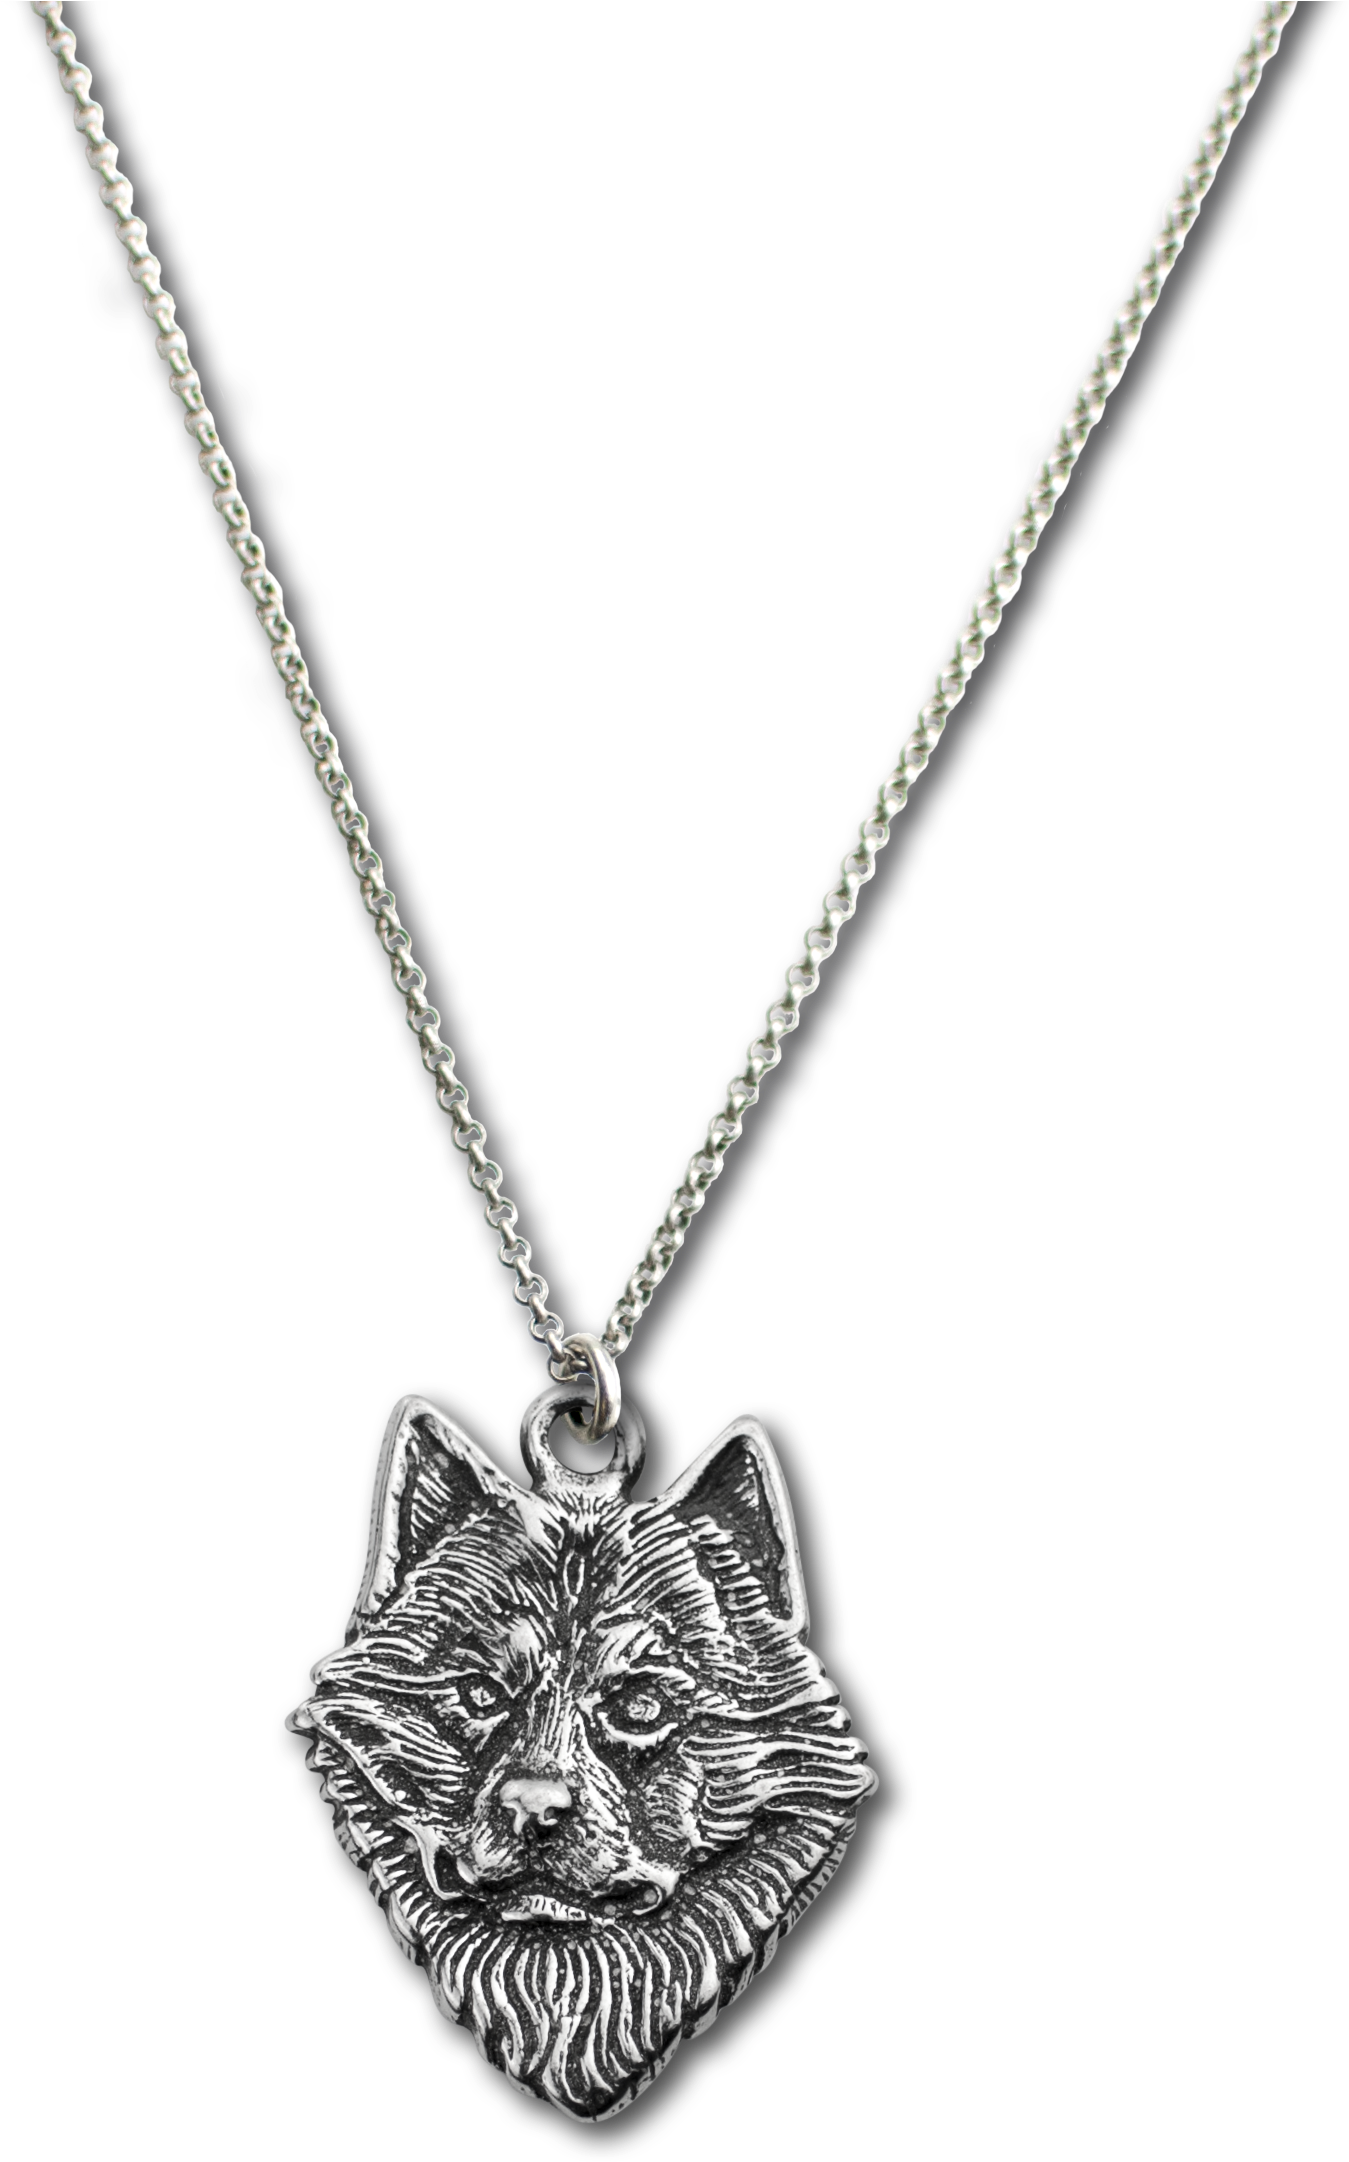 A Silver Necklace With A Wolf Head Pendant